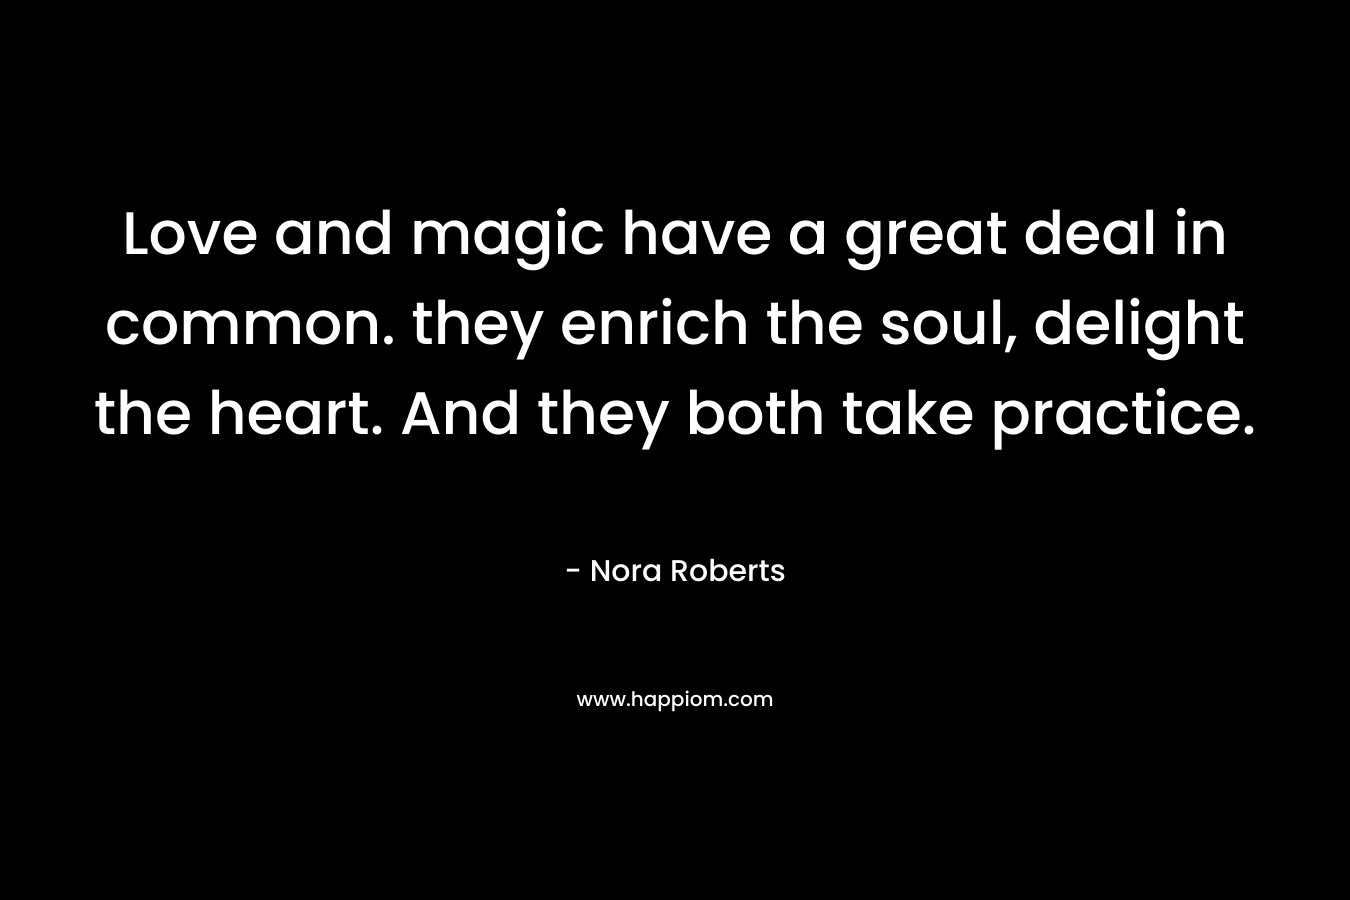 Love and magic have a great deal in common. they enrich the soul, delight the heart. And they both take practice. – Nora Roberts